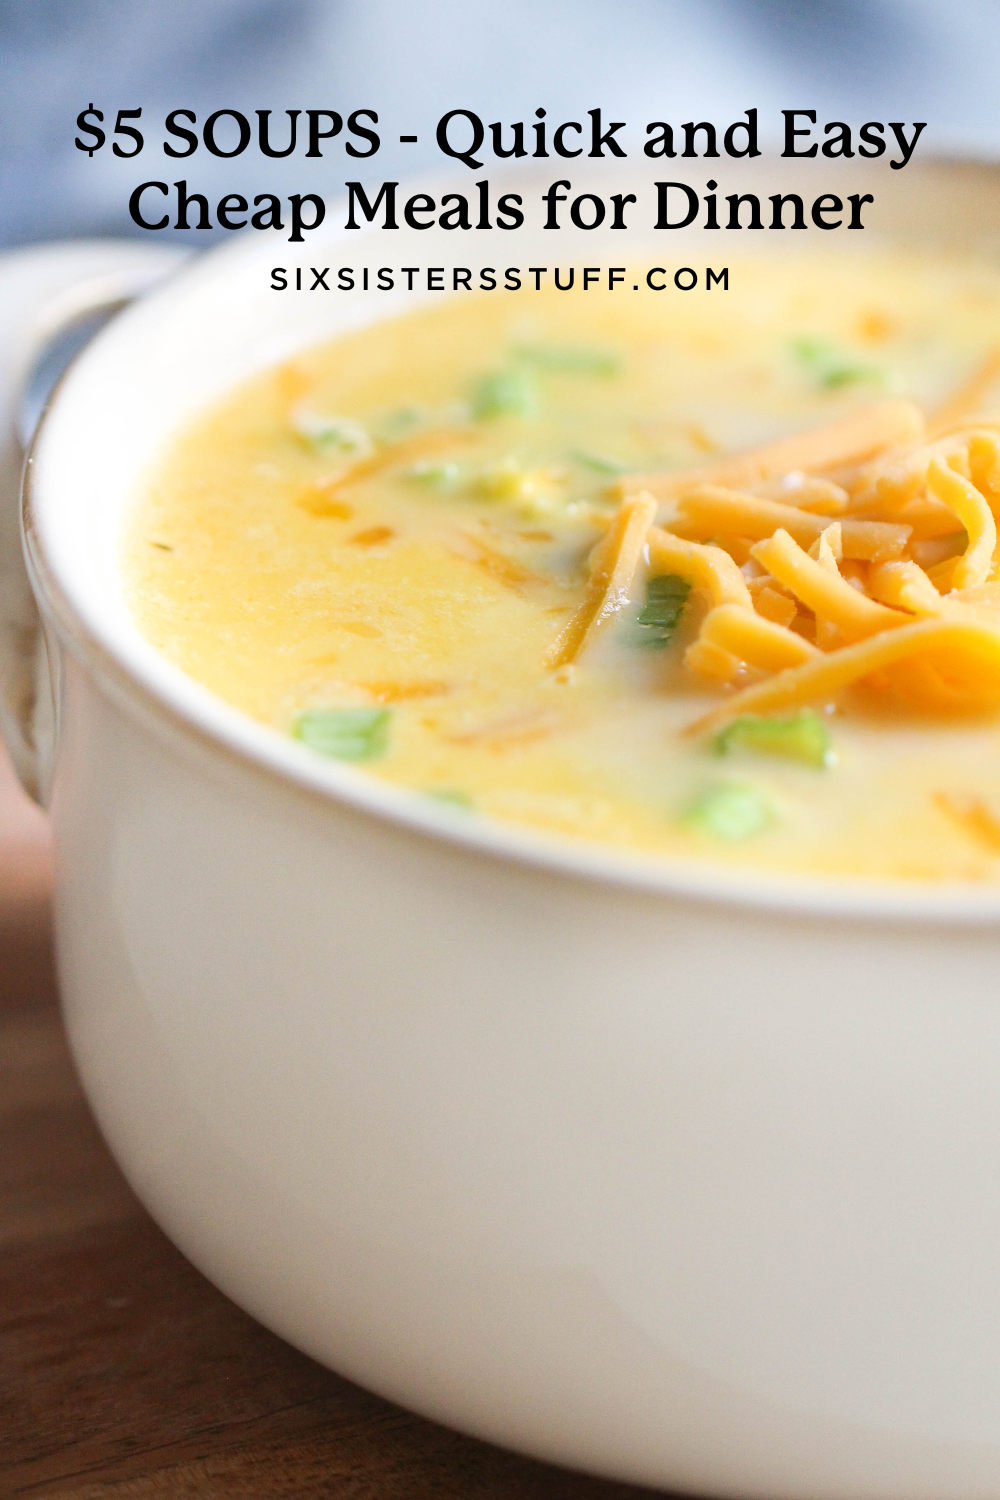 $5 SOUPS – Quick and Easy Cheap Meals for Dinner